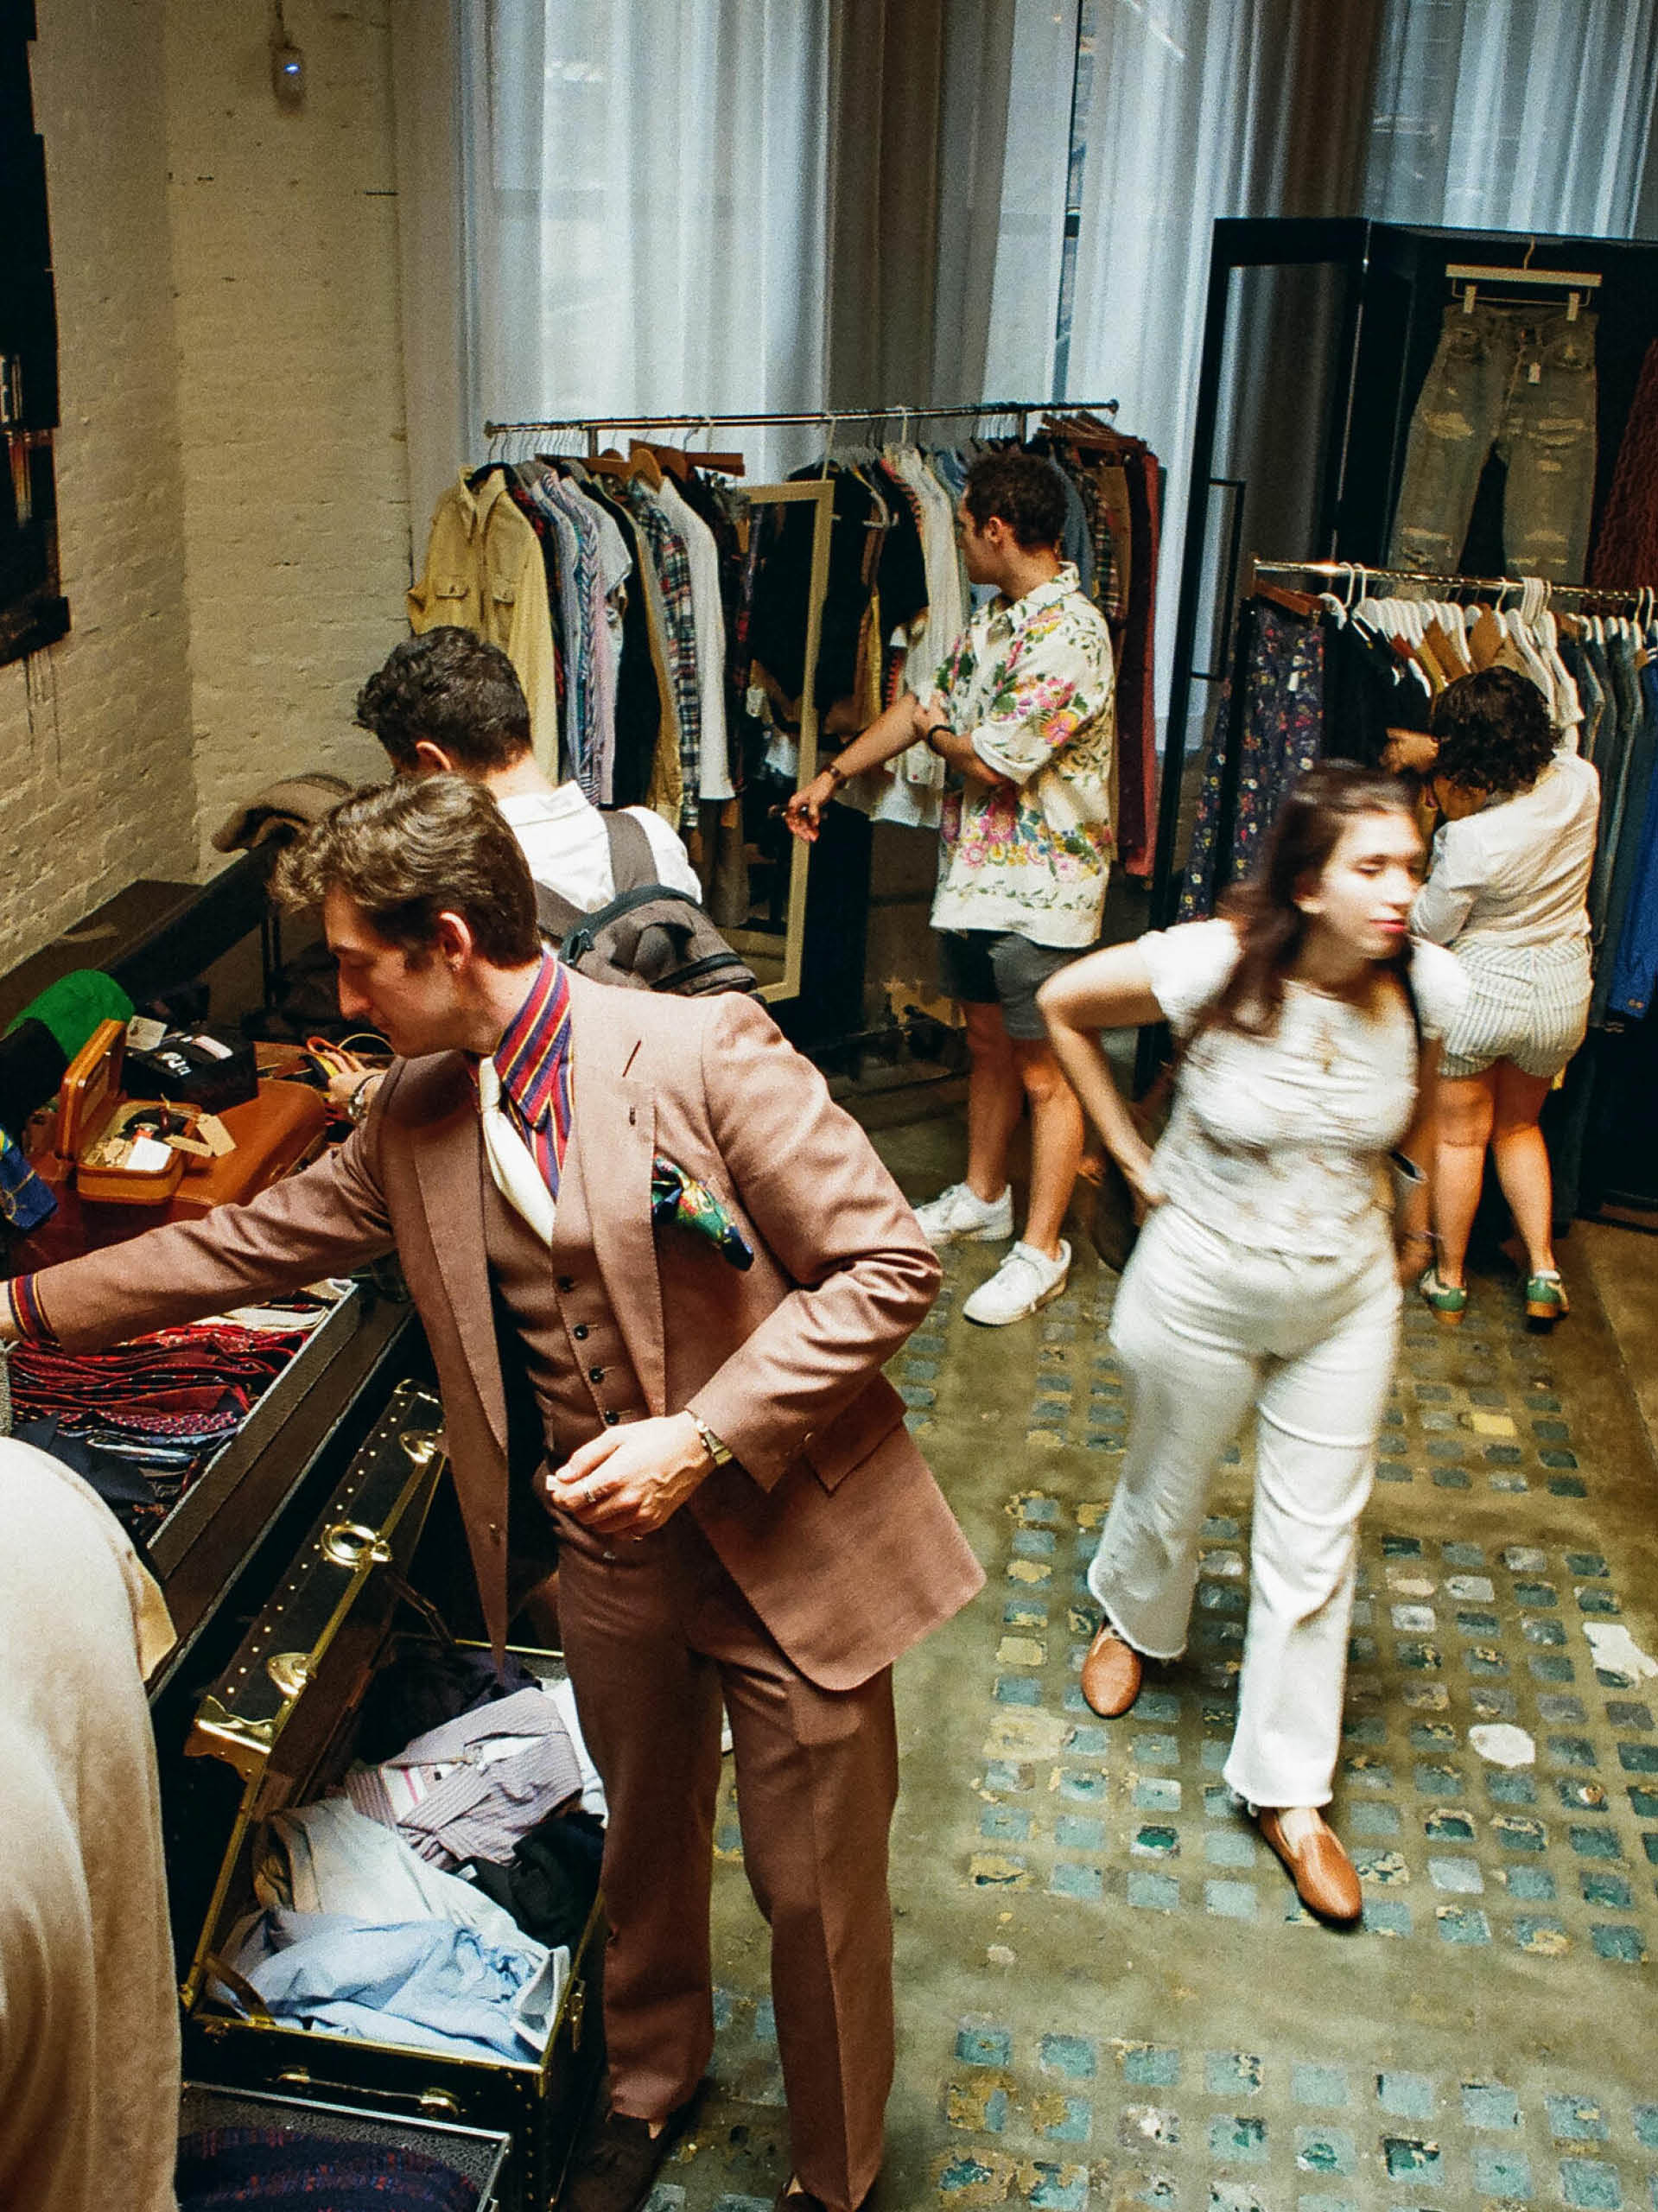 A Menswear Pop-Up Market & Sale at NeueHouse Madison Square